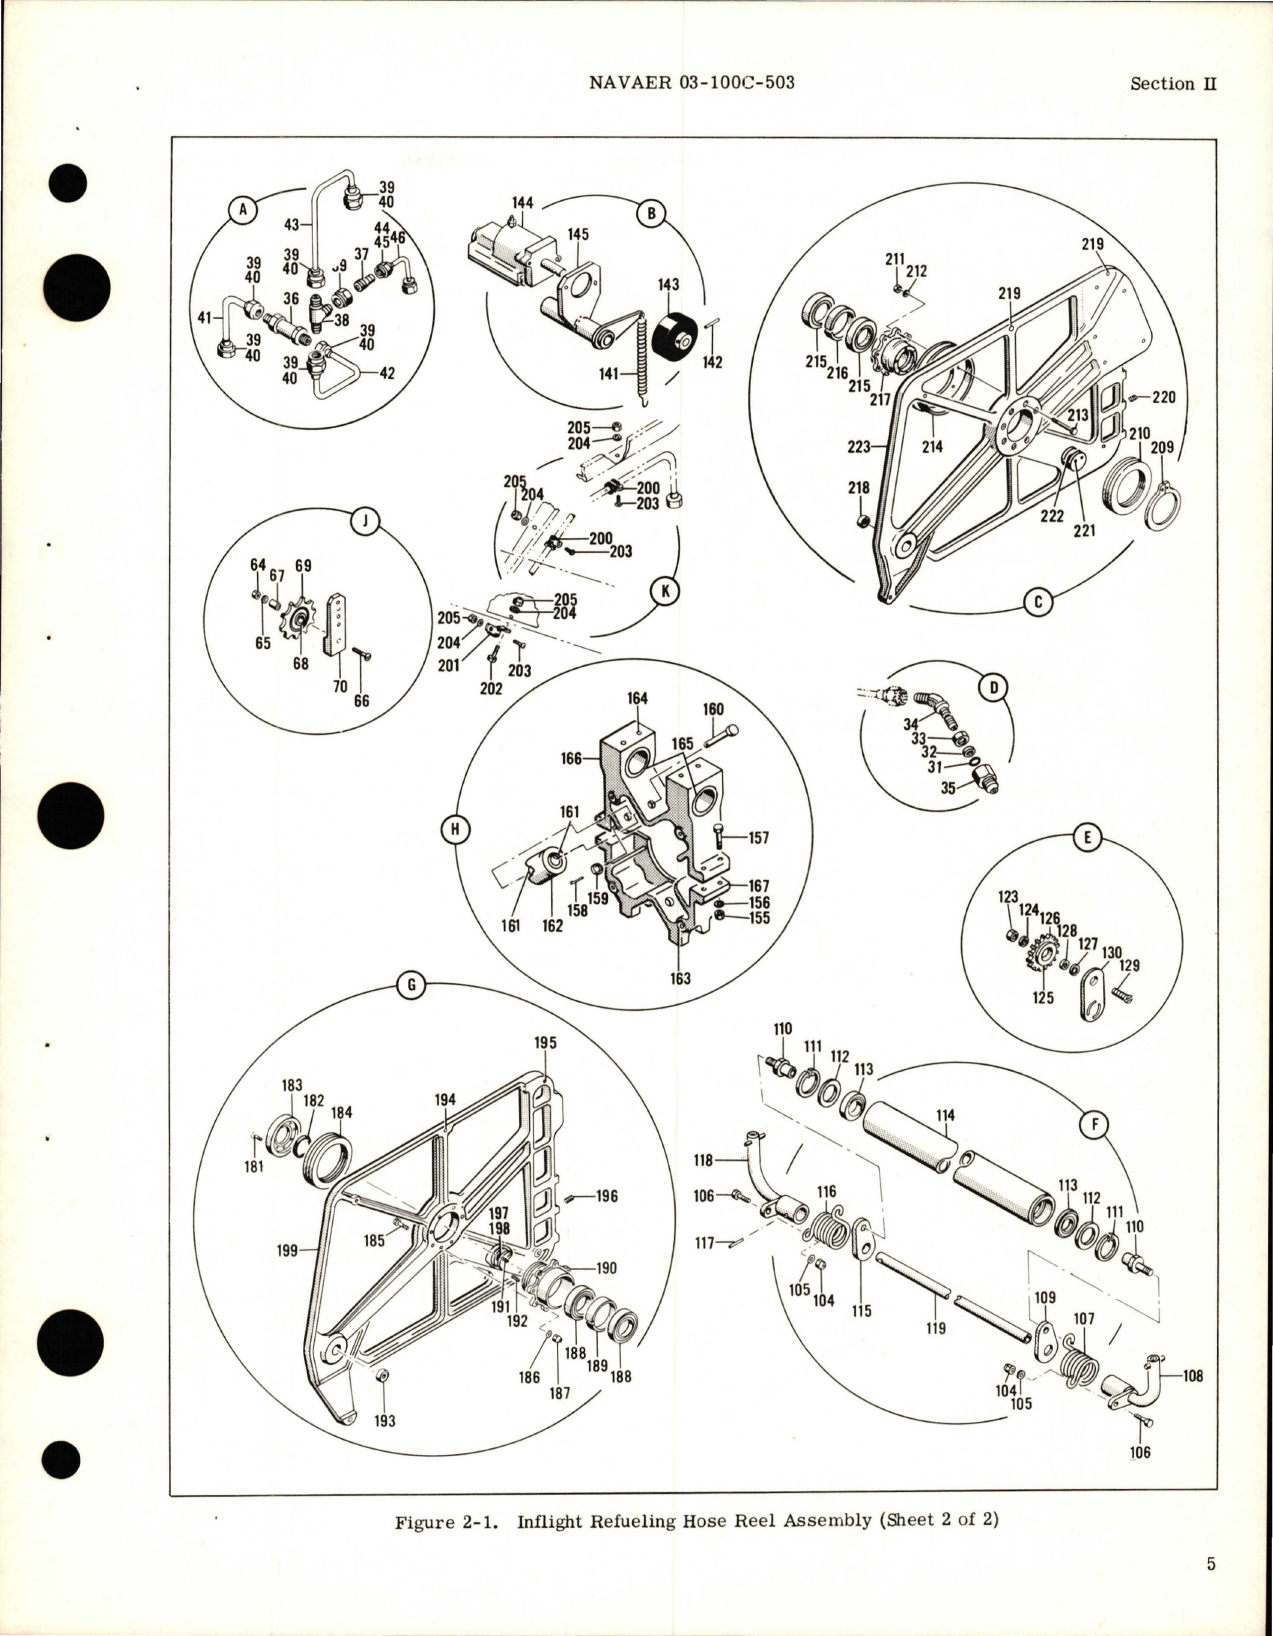 Sample page 9 from AirCorps Library document: Overhaul Instructions for Inflight Refueling Hose Reel Assembly - Model FR250